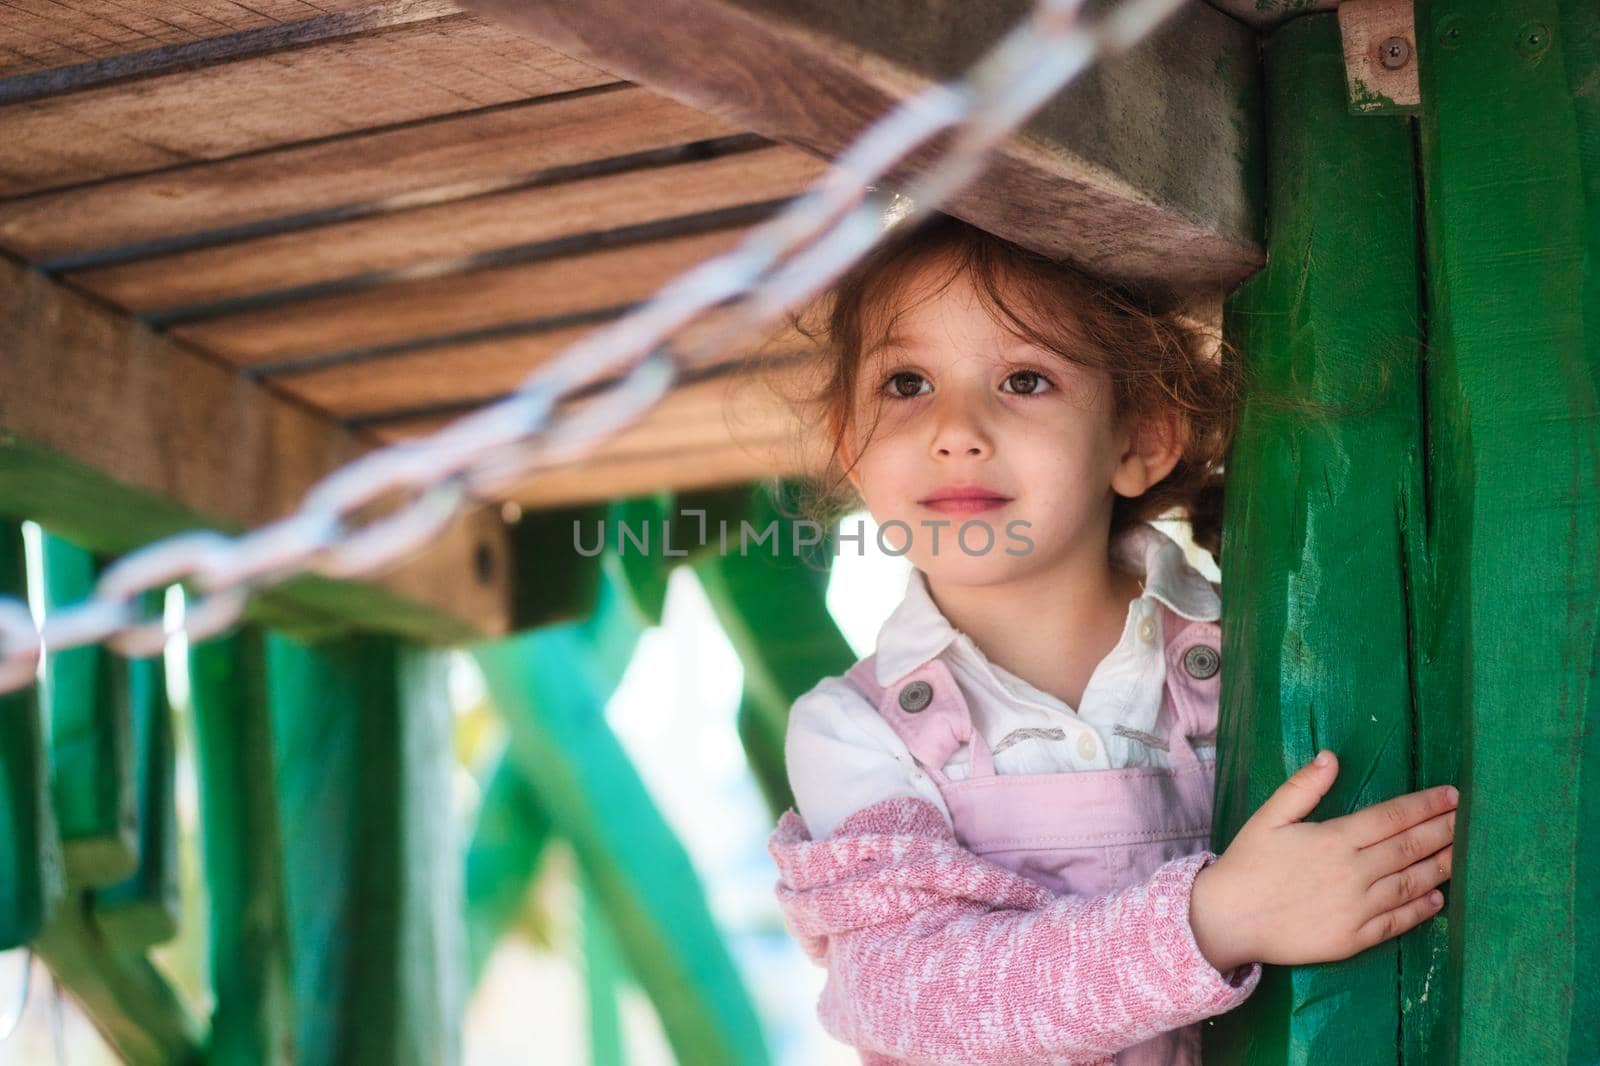 Cute adorable young girl looking thoughtful in a public park play area